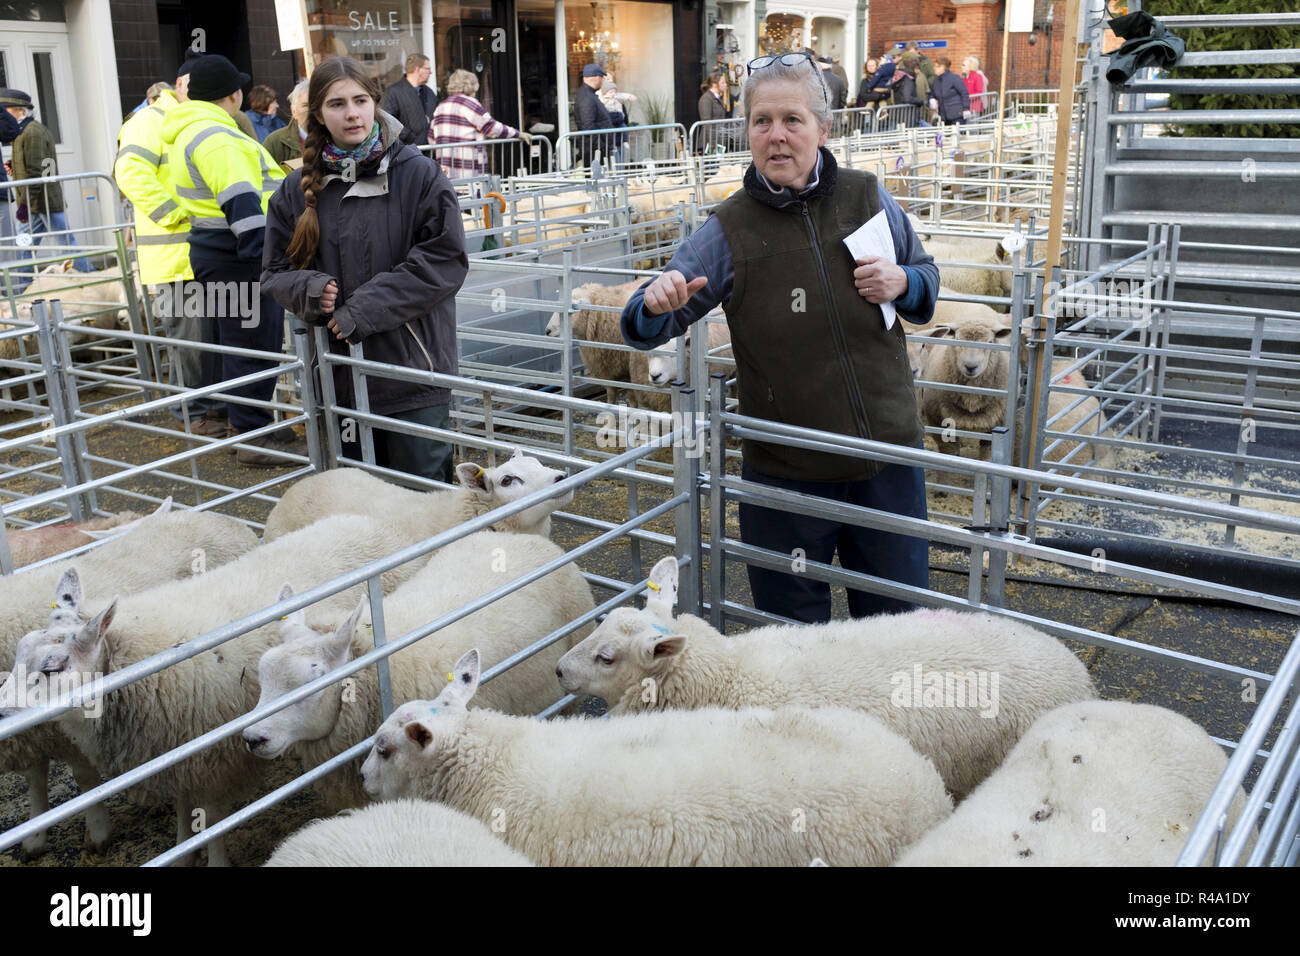 Winslow, UK - November 26, 2018. Sheep are held for presentation at the Winslow Primestock Show. The show is an annual event held in the historic market town in Buckinghamshire. Credit: Paul Maguire/Alamy Live News Stock Photo